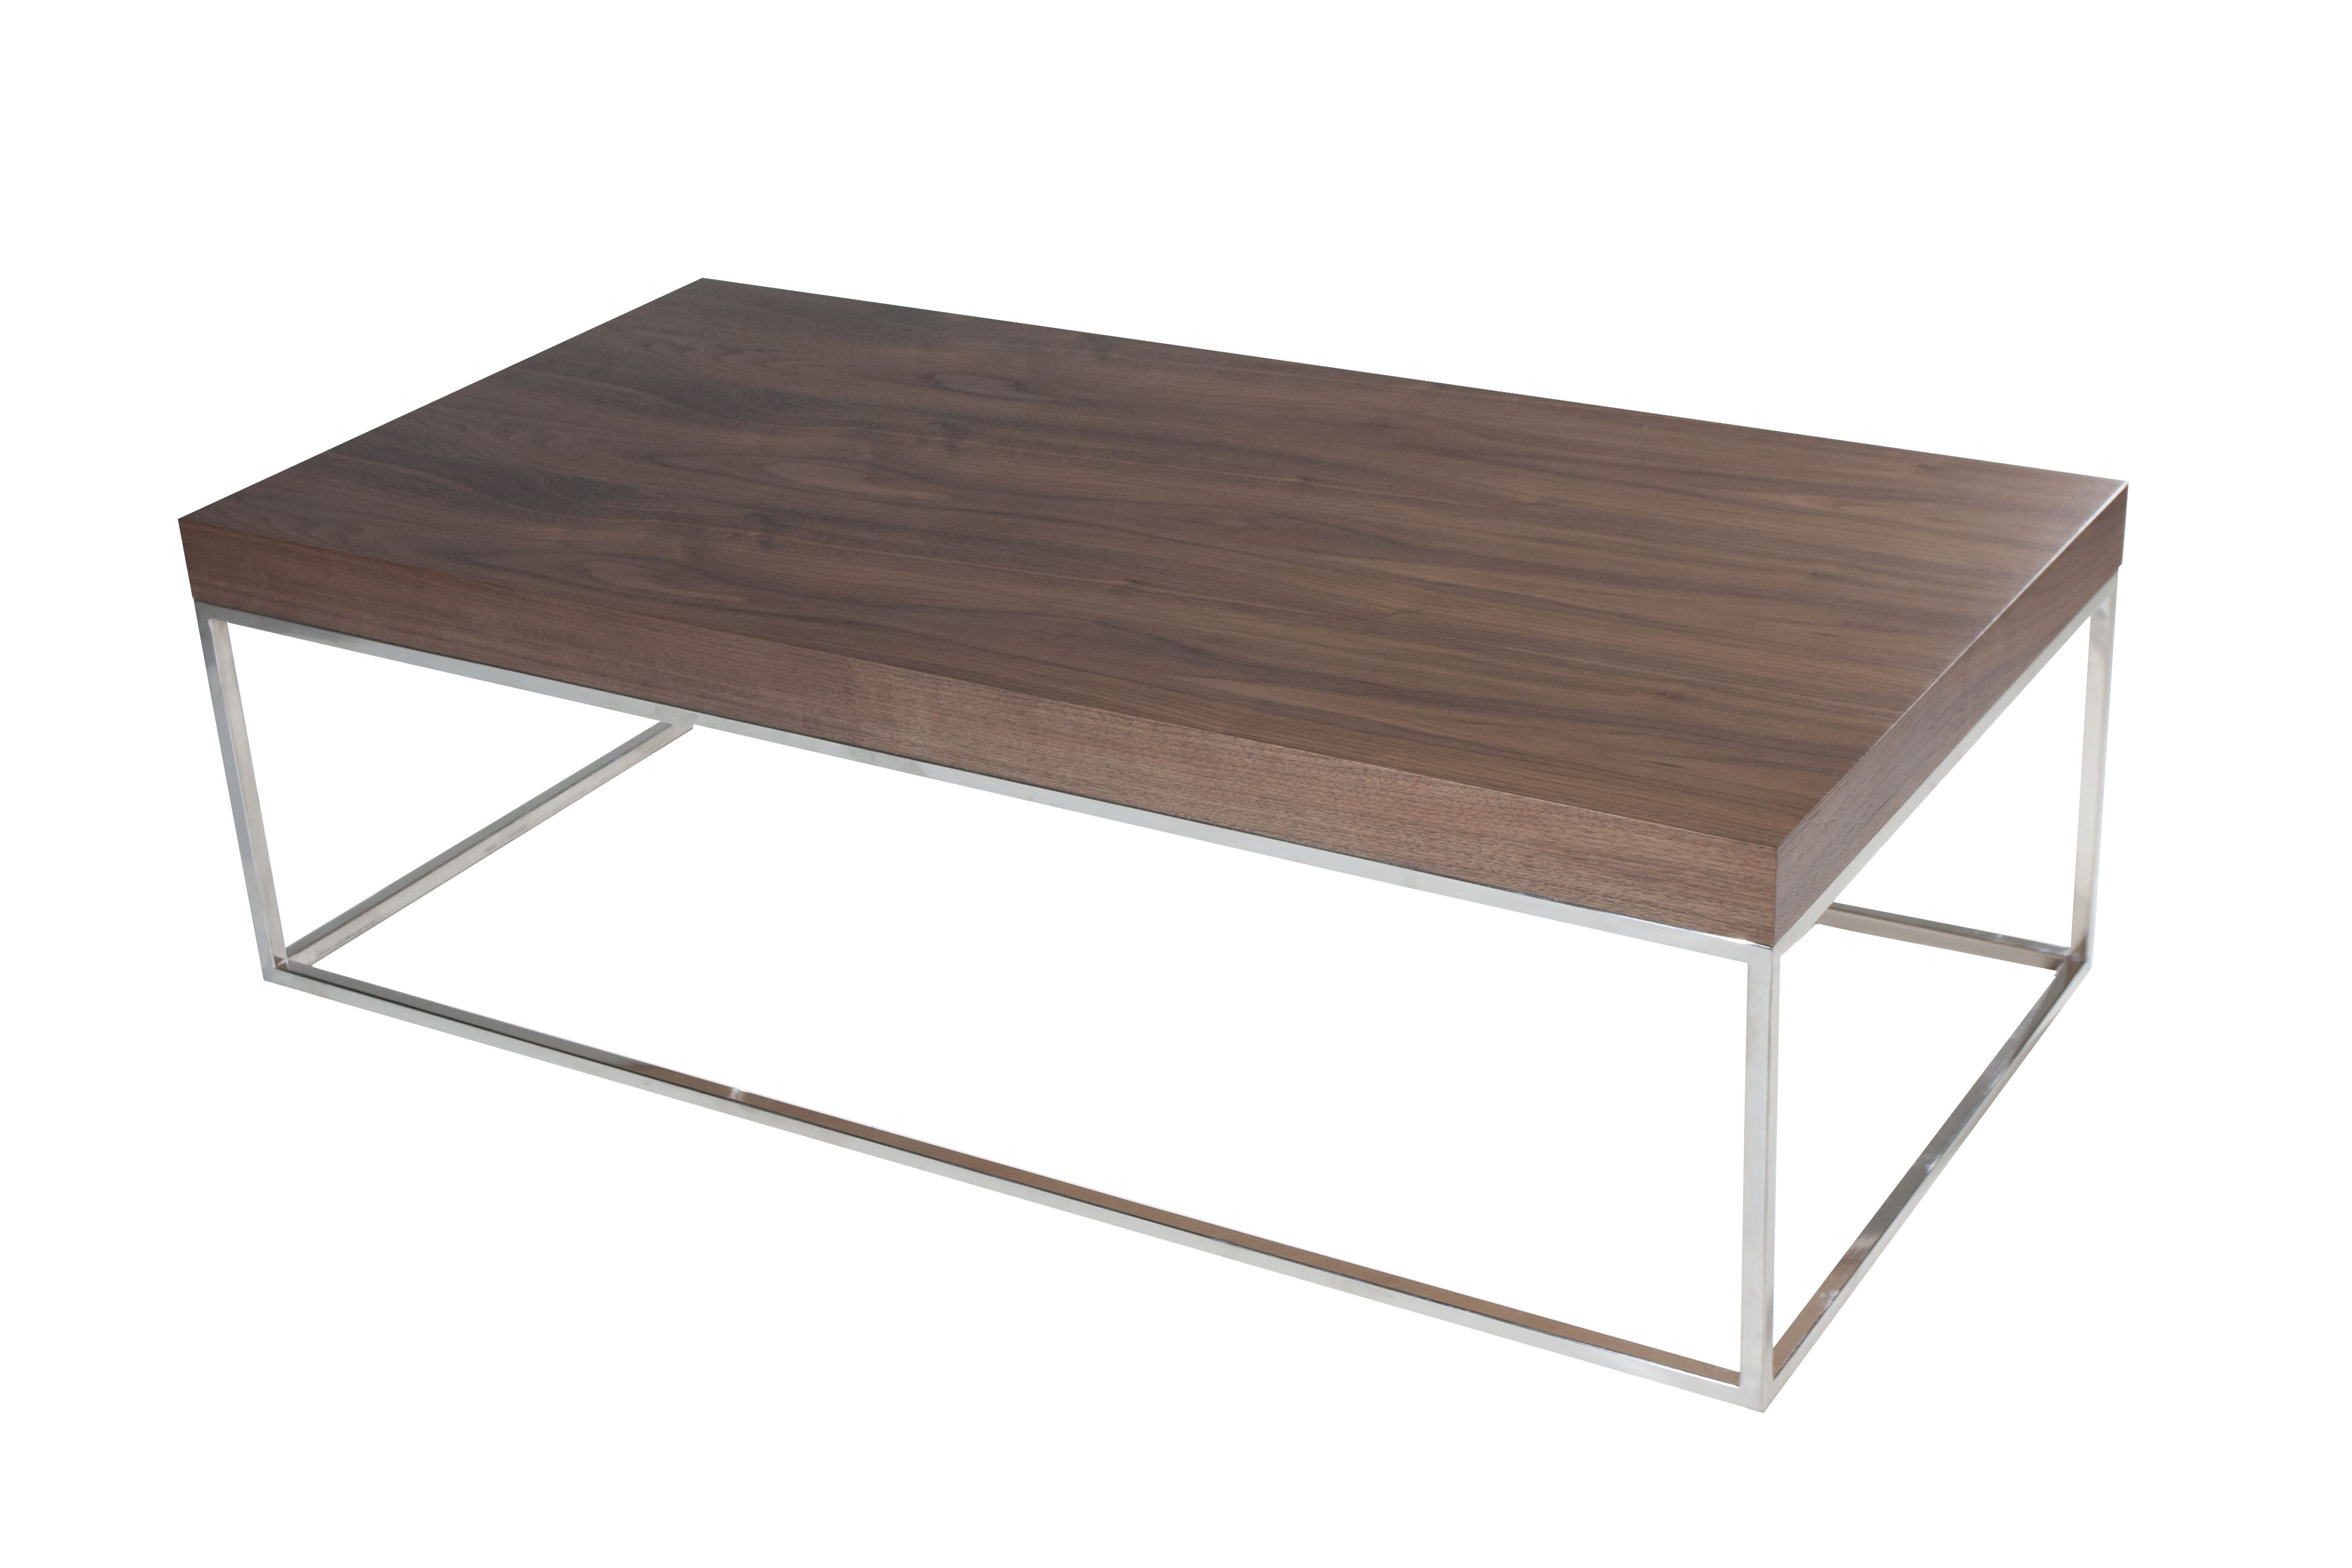 Featured image of post Low Profile Coffe Table / The stainless steel base, and a clean, sleek design offer a modern touch to this classic coffee table.